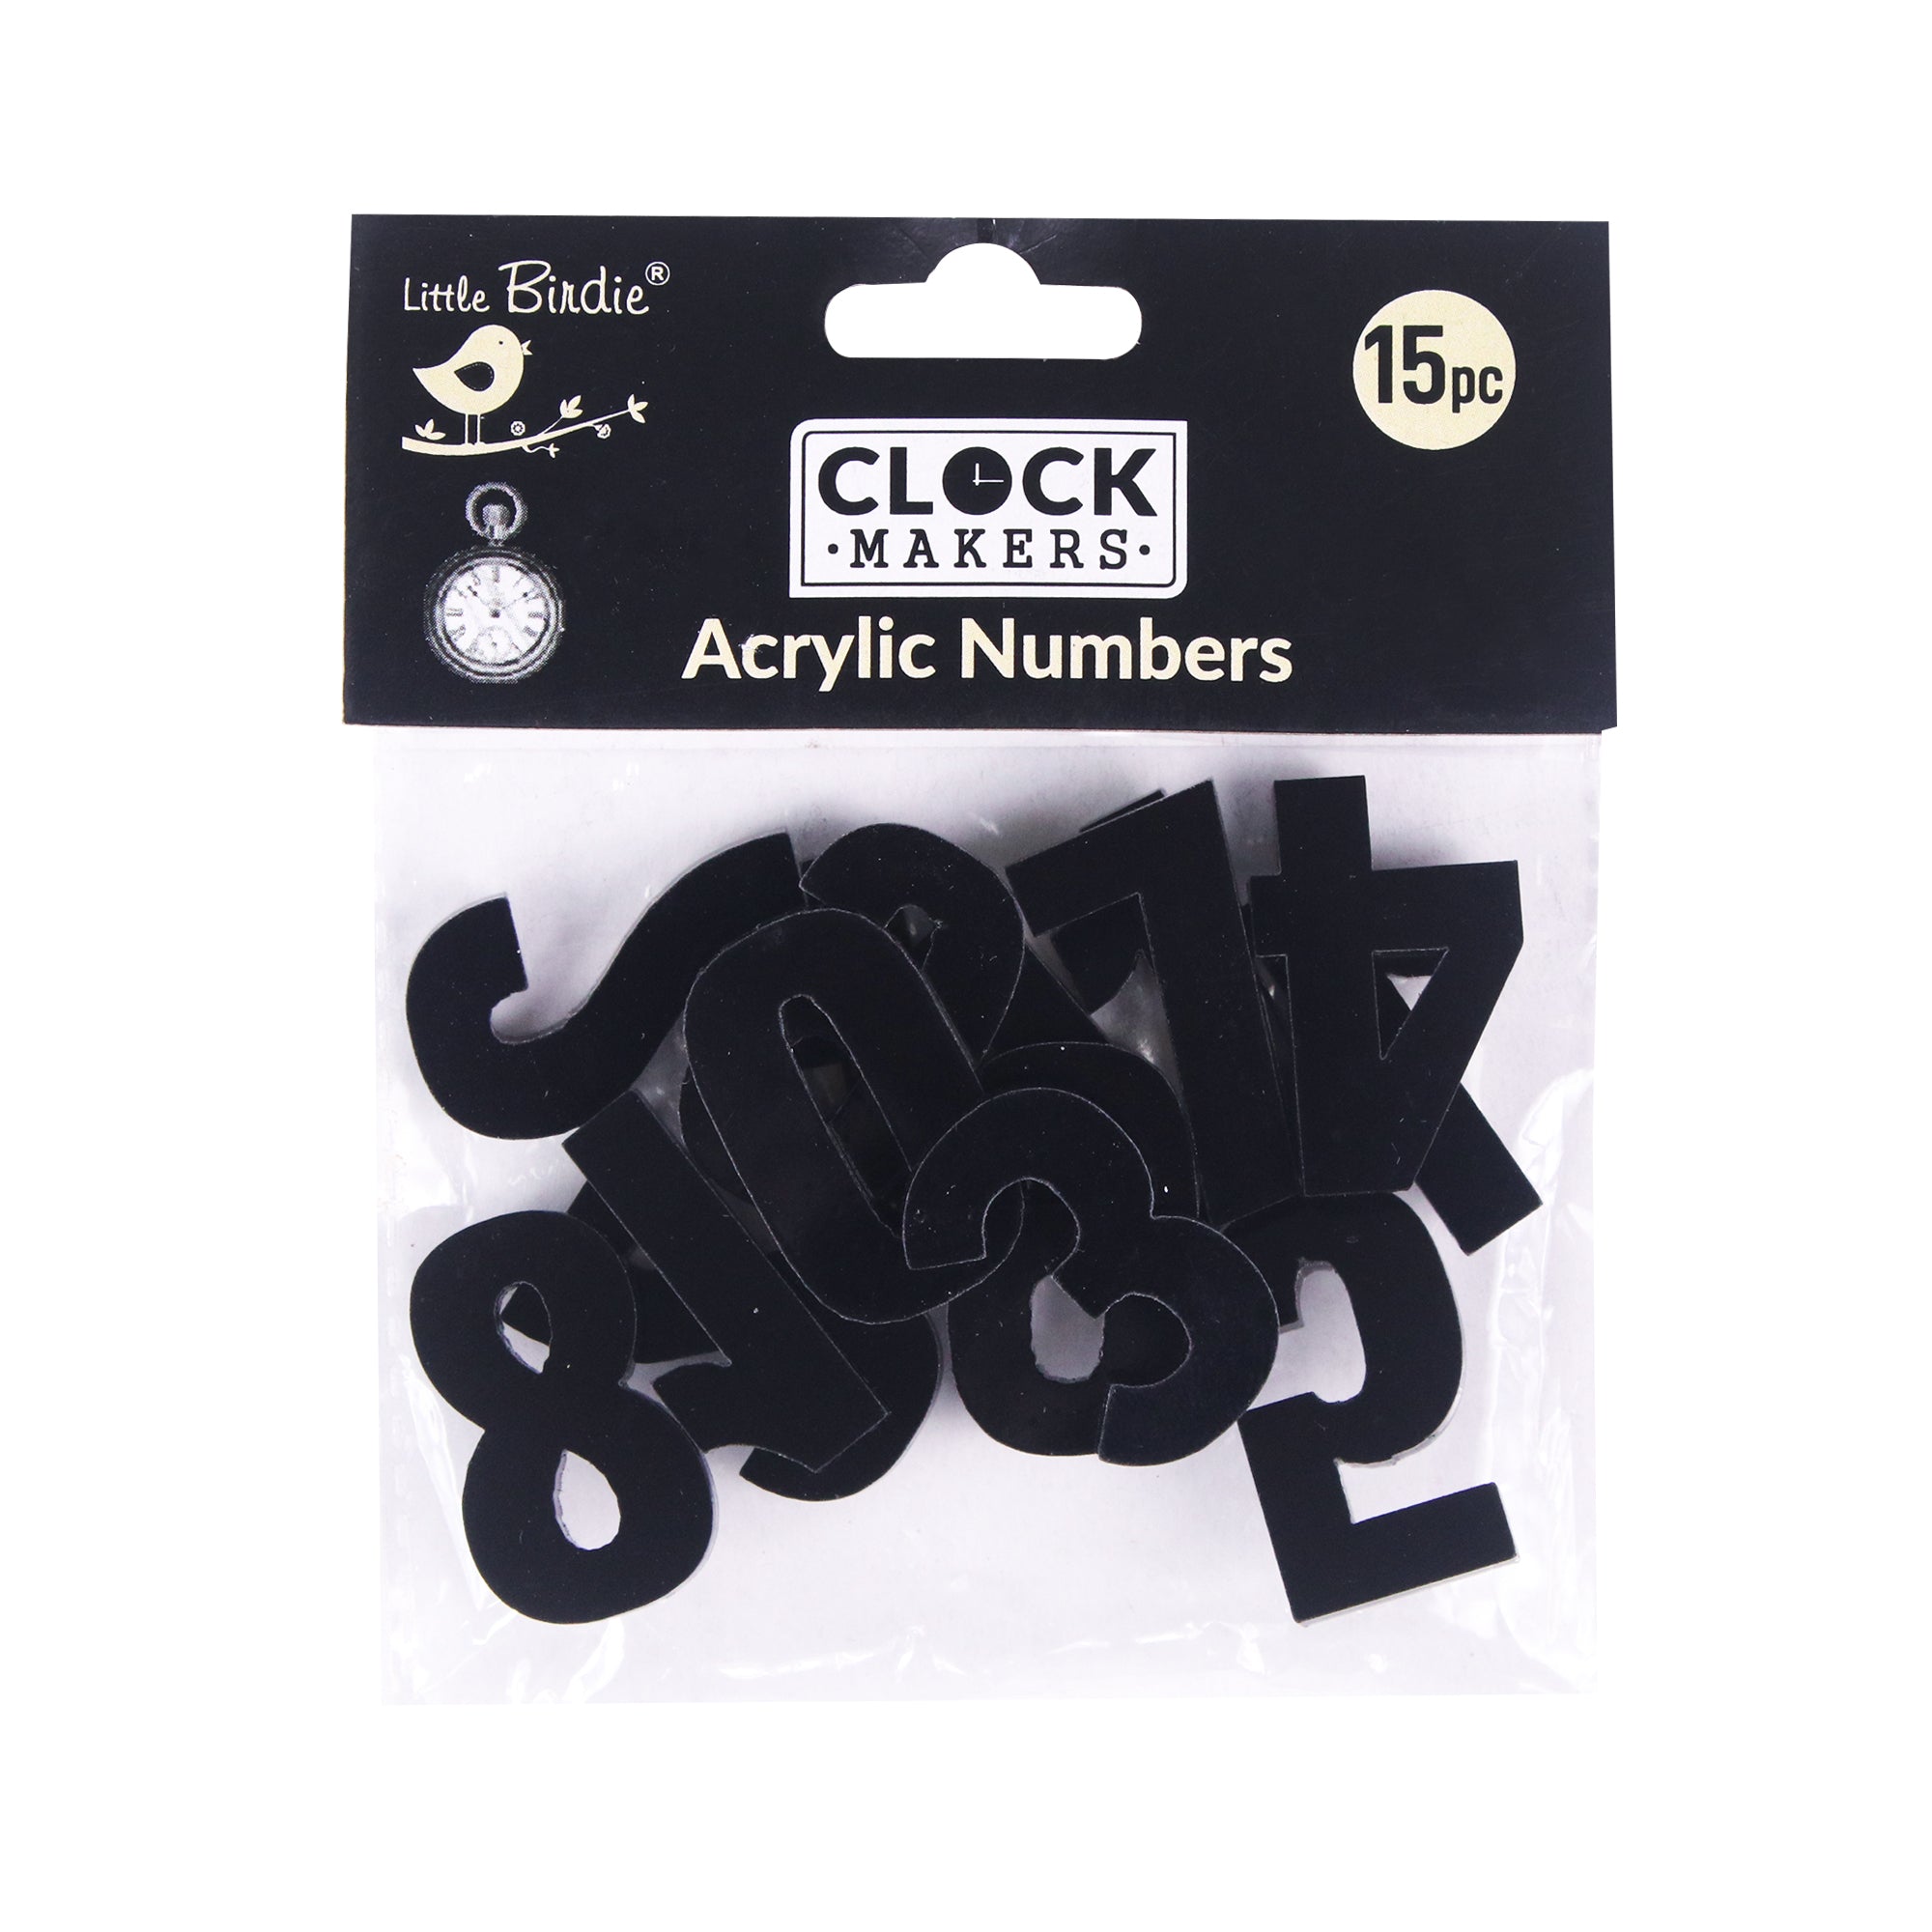 Clock Acrylic Numbers Black 1inch 2.7mm Thick 15pc